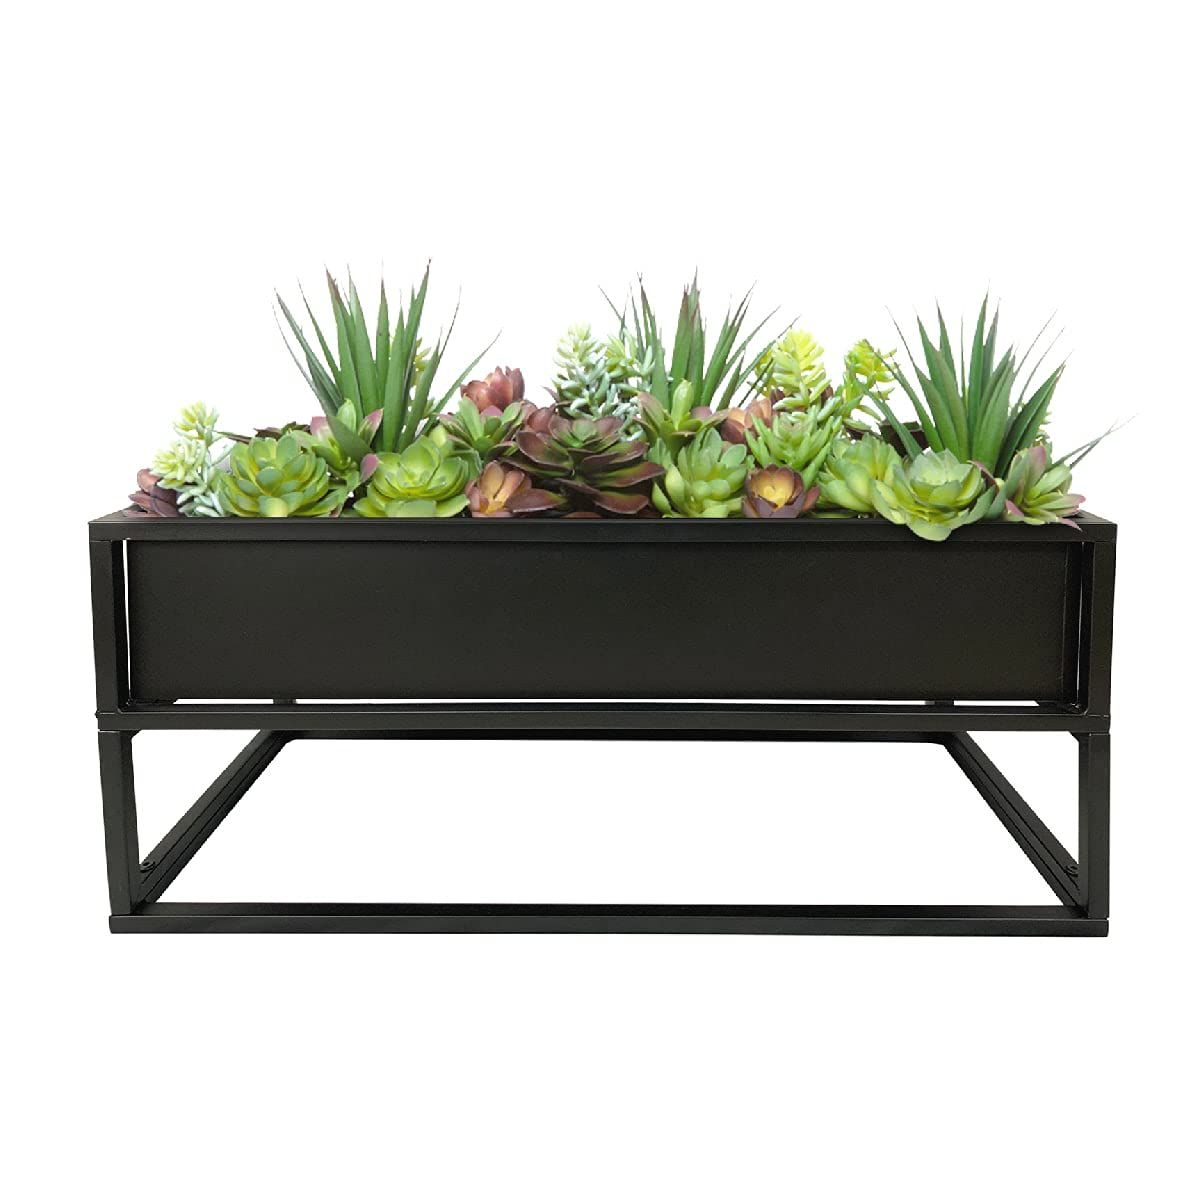 Fashionable Plant Stands With Flower Box Within Amazon : Cocoyard Modern Elevated Metal Planter Box – Made Durable And  Resilient Metal – Indoor Outdoor Plant Stand – Ideal For Garden Decor,  Backyard And Patio Decor : Patio, Lawn & Garden (View 6 of 10)